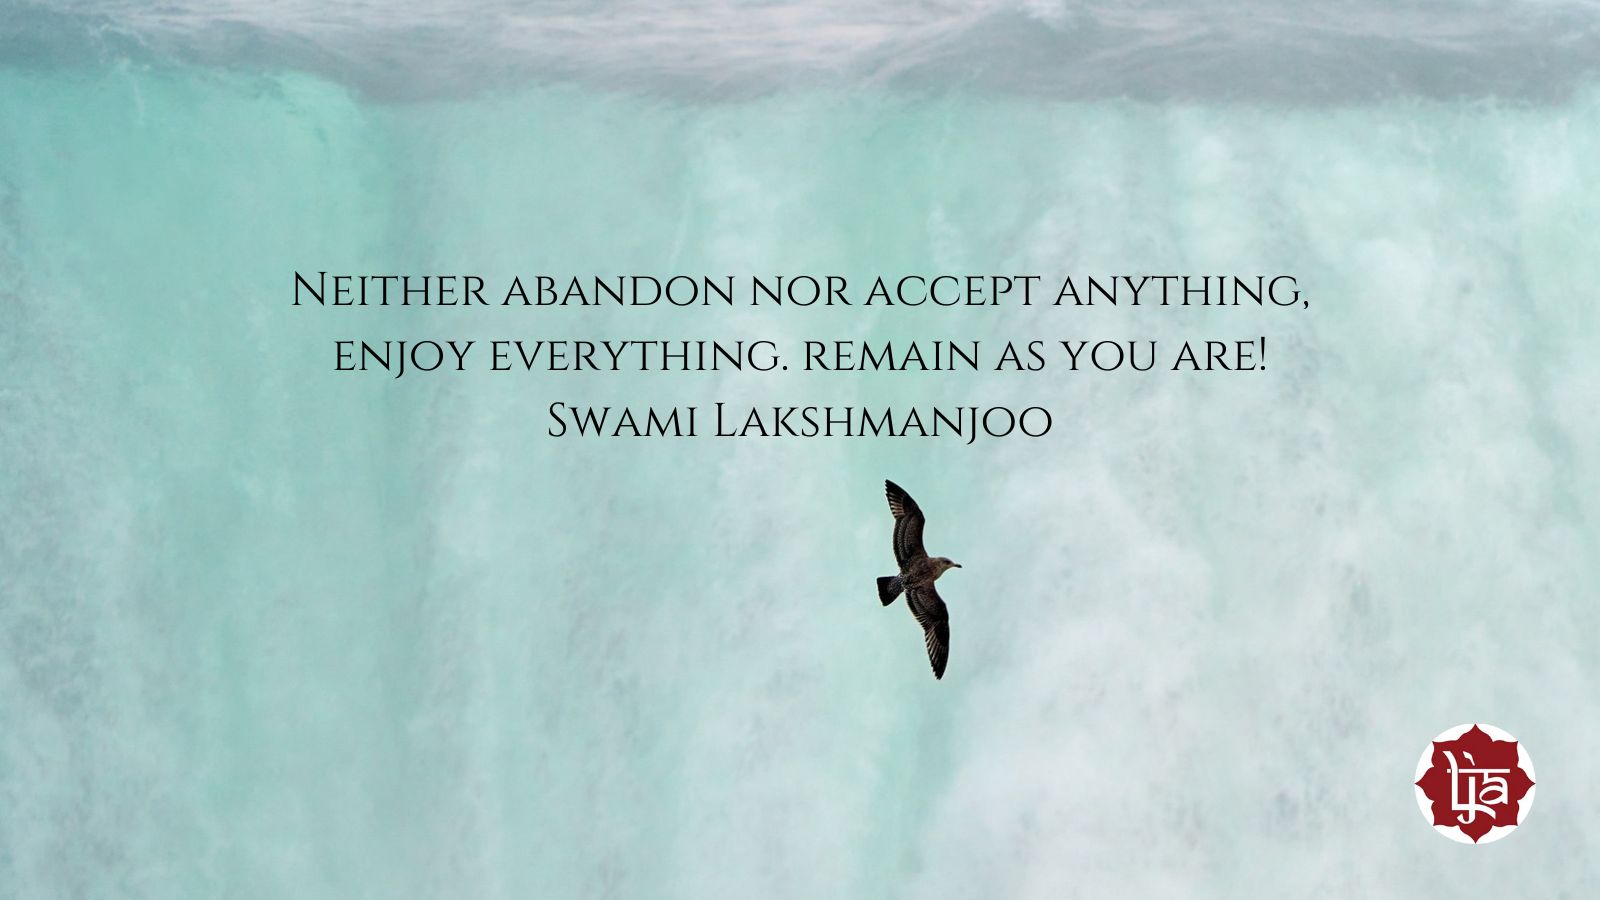 Neither abandon nor accept anything, enjoy everything. remain as you are! ~Swami Lakshmanjoo